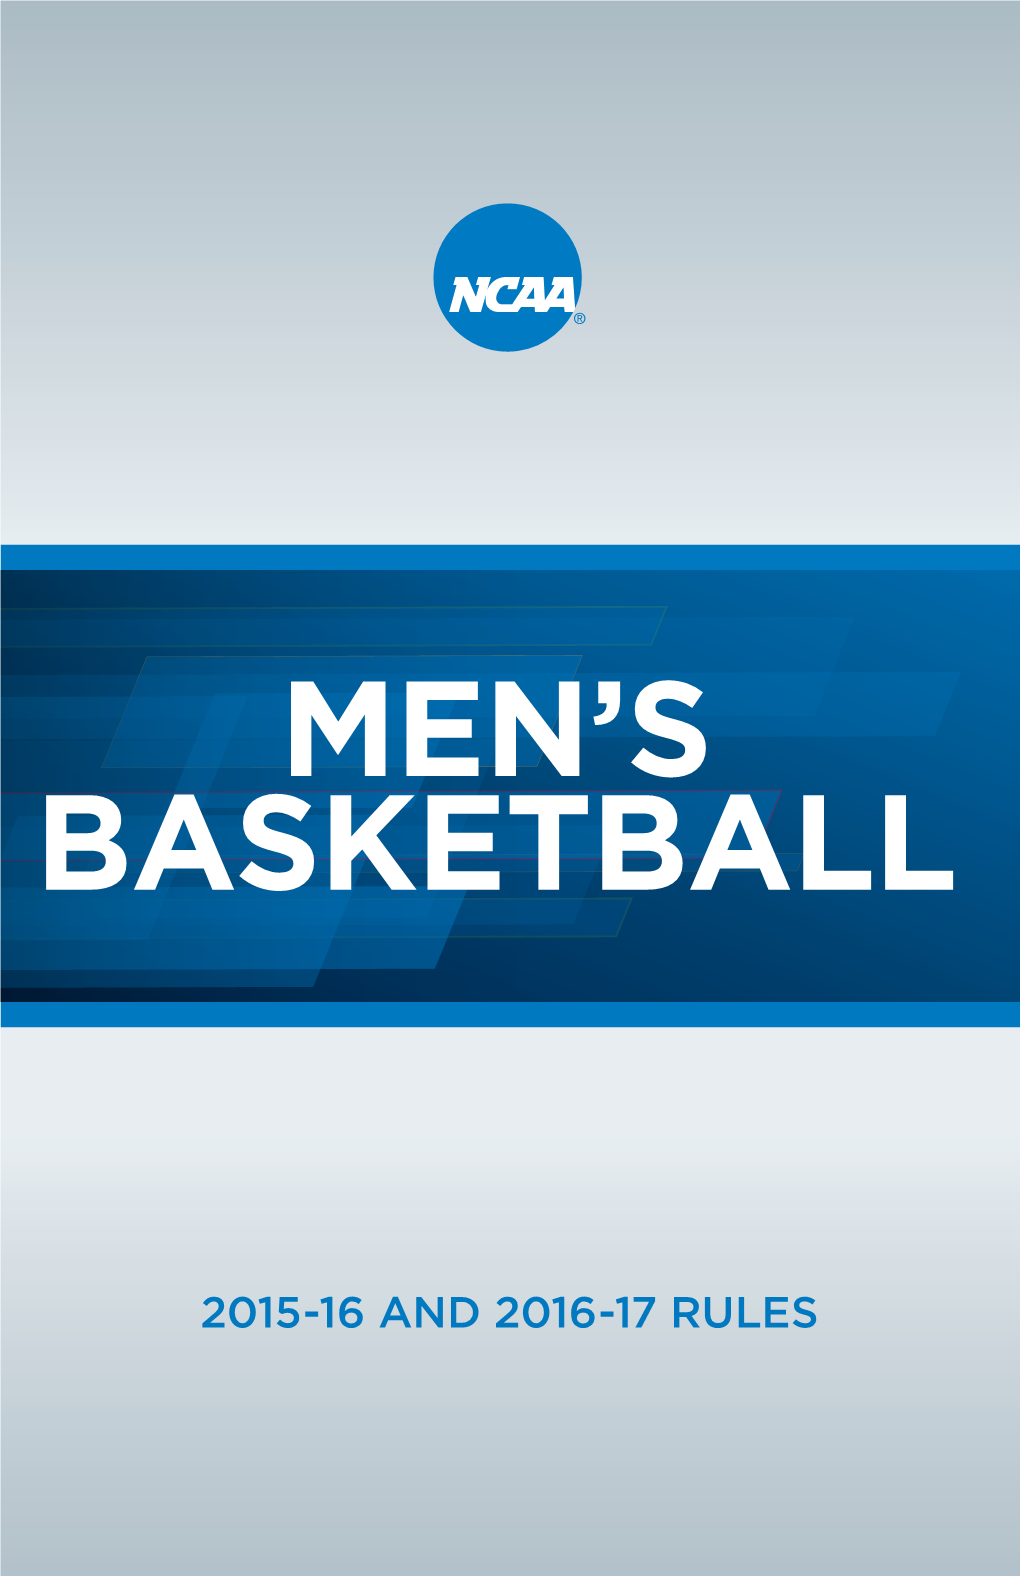 Men's Basketball Rules Changes for 2016 and 2017